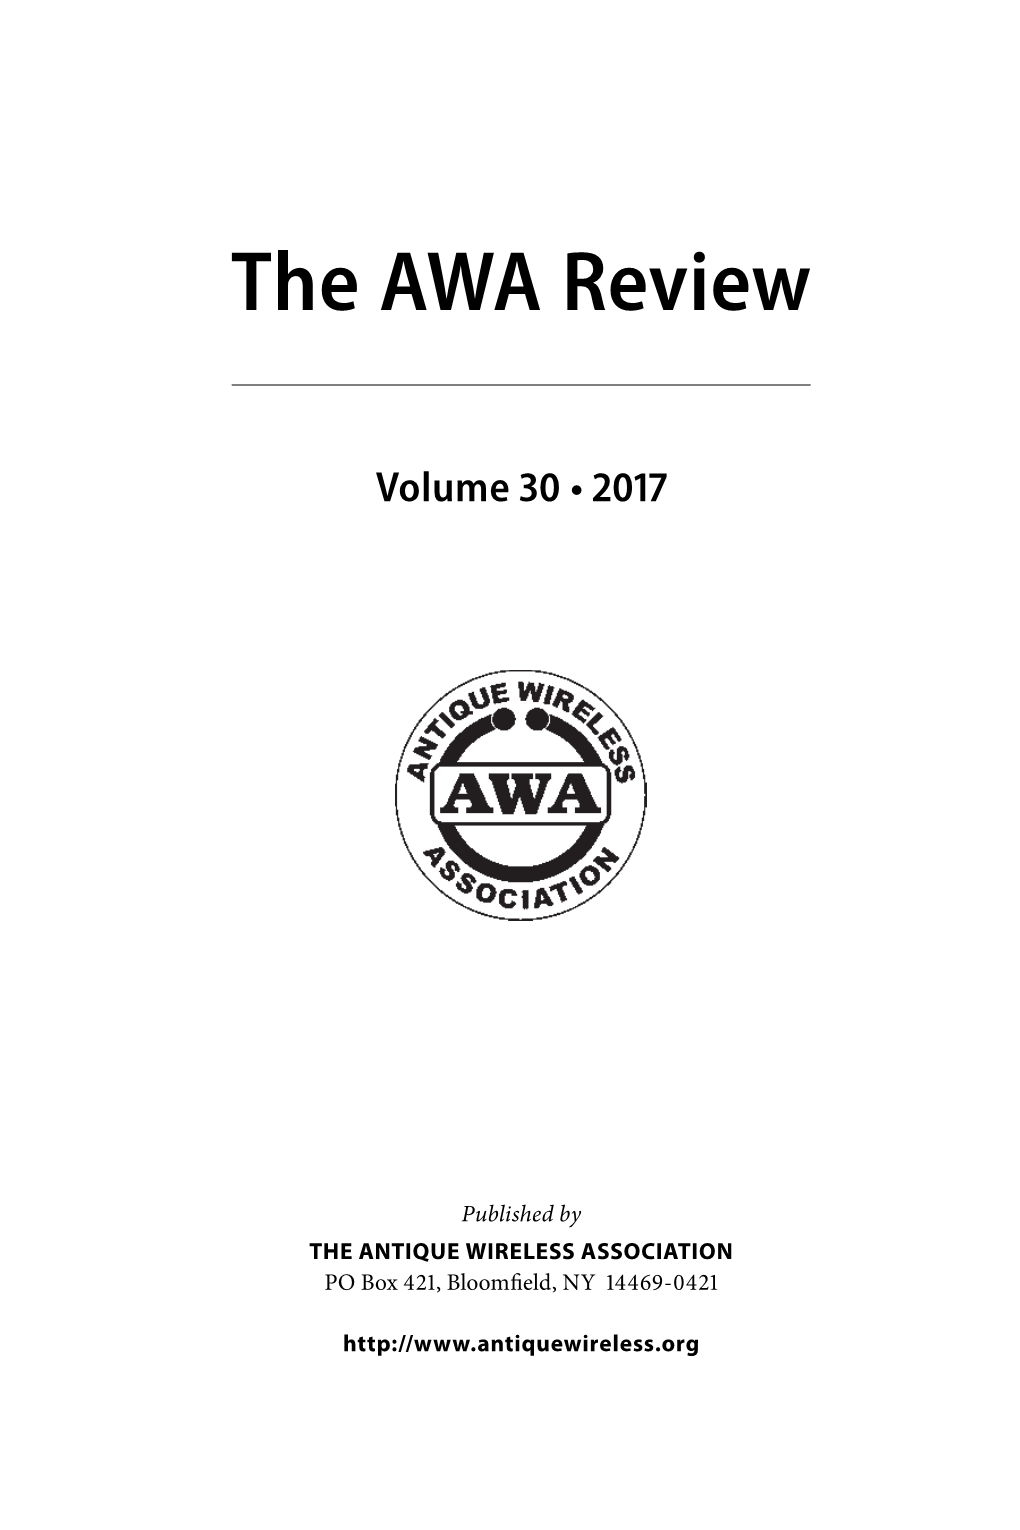 The AWA Review